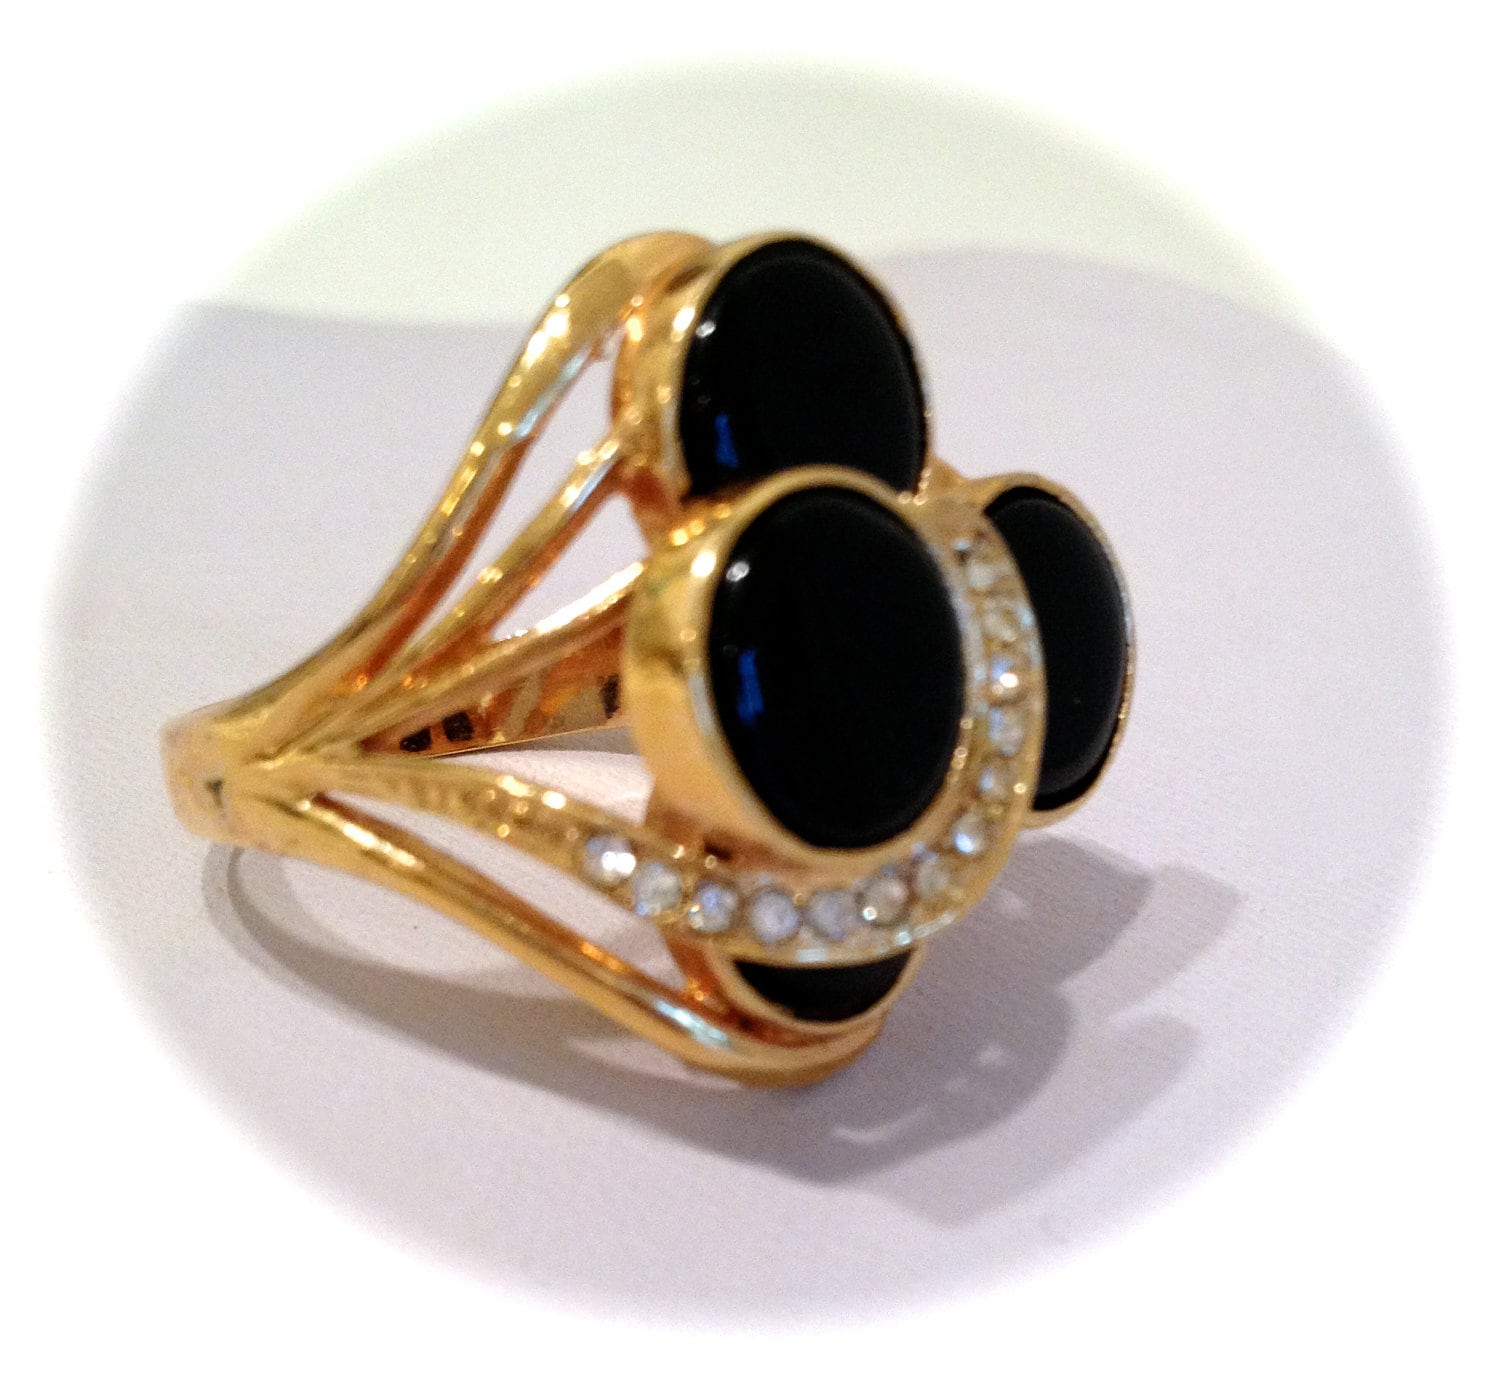 Vintage 18K Gold and Black Estate Jewelry Ring